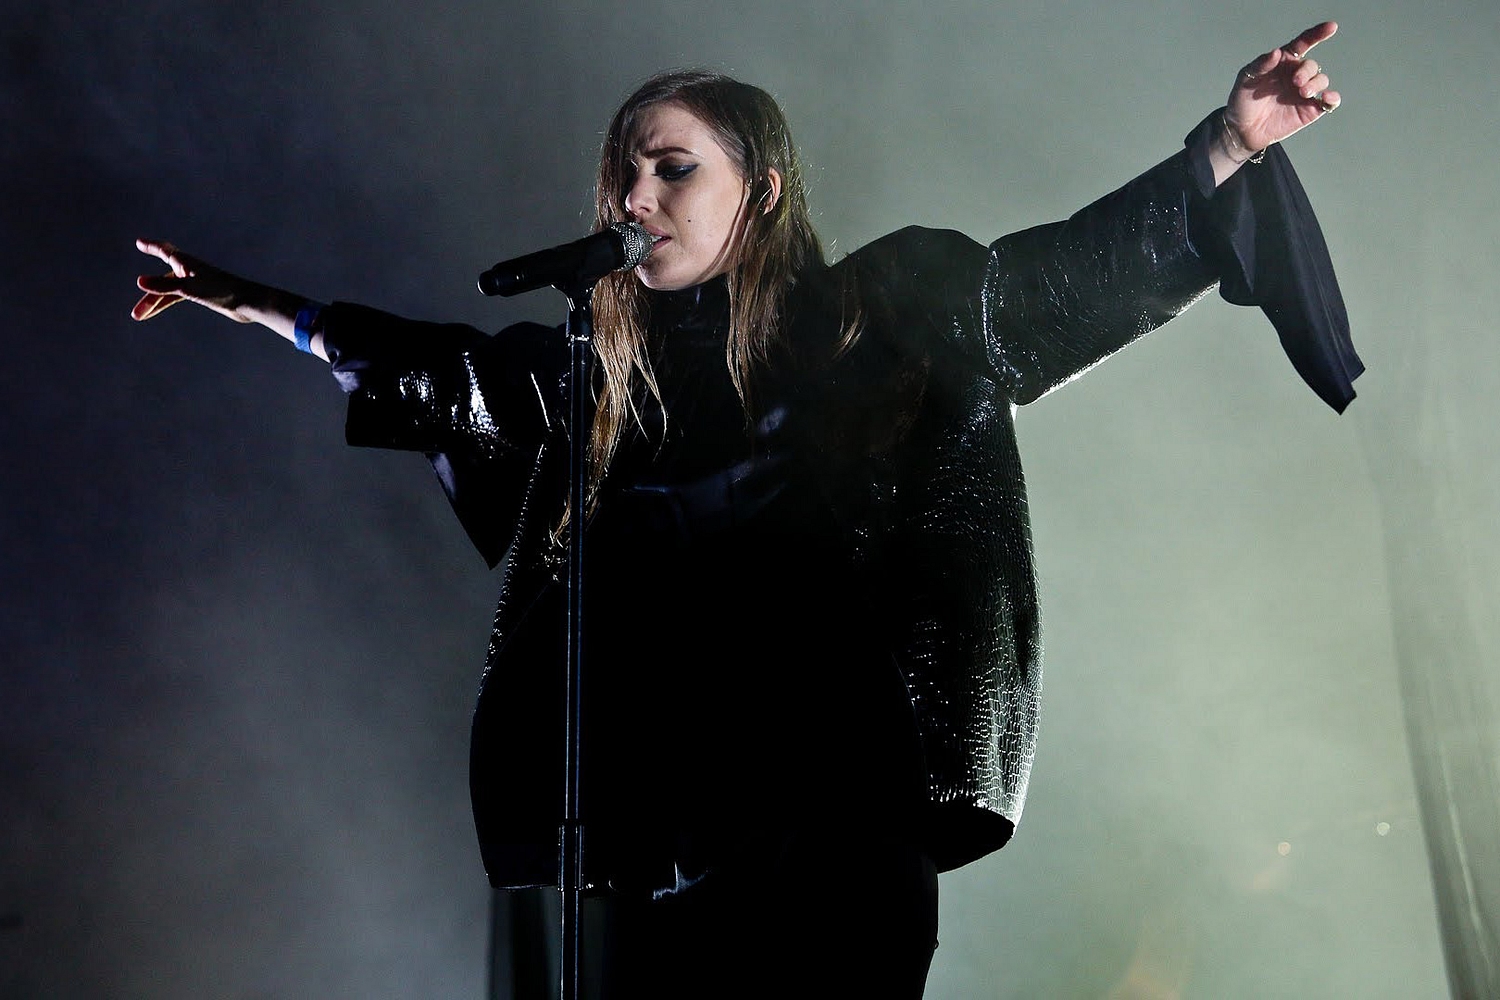 Watch Lykke Li perform ‘No Rest For The Wicked’